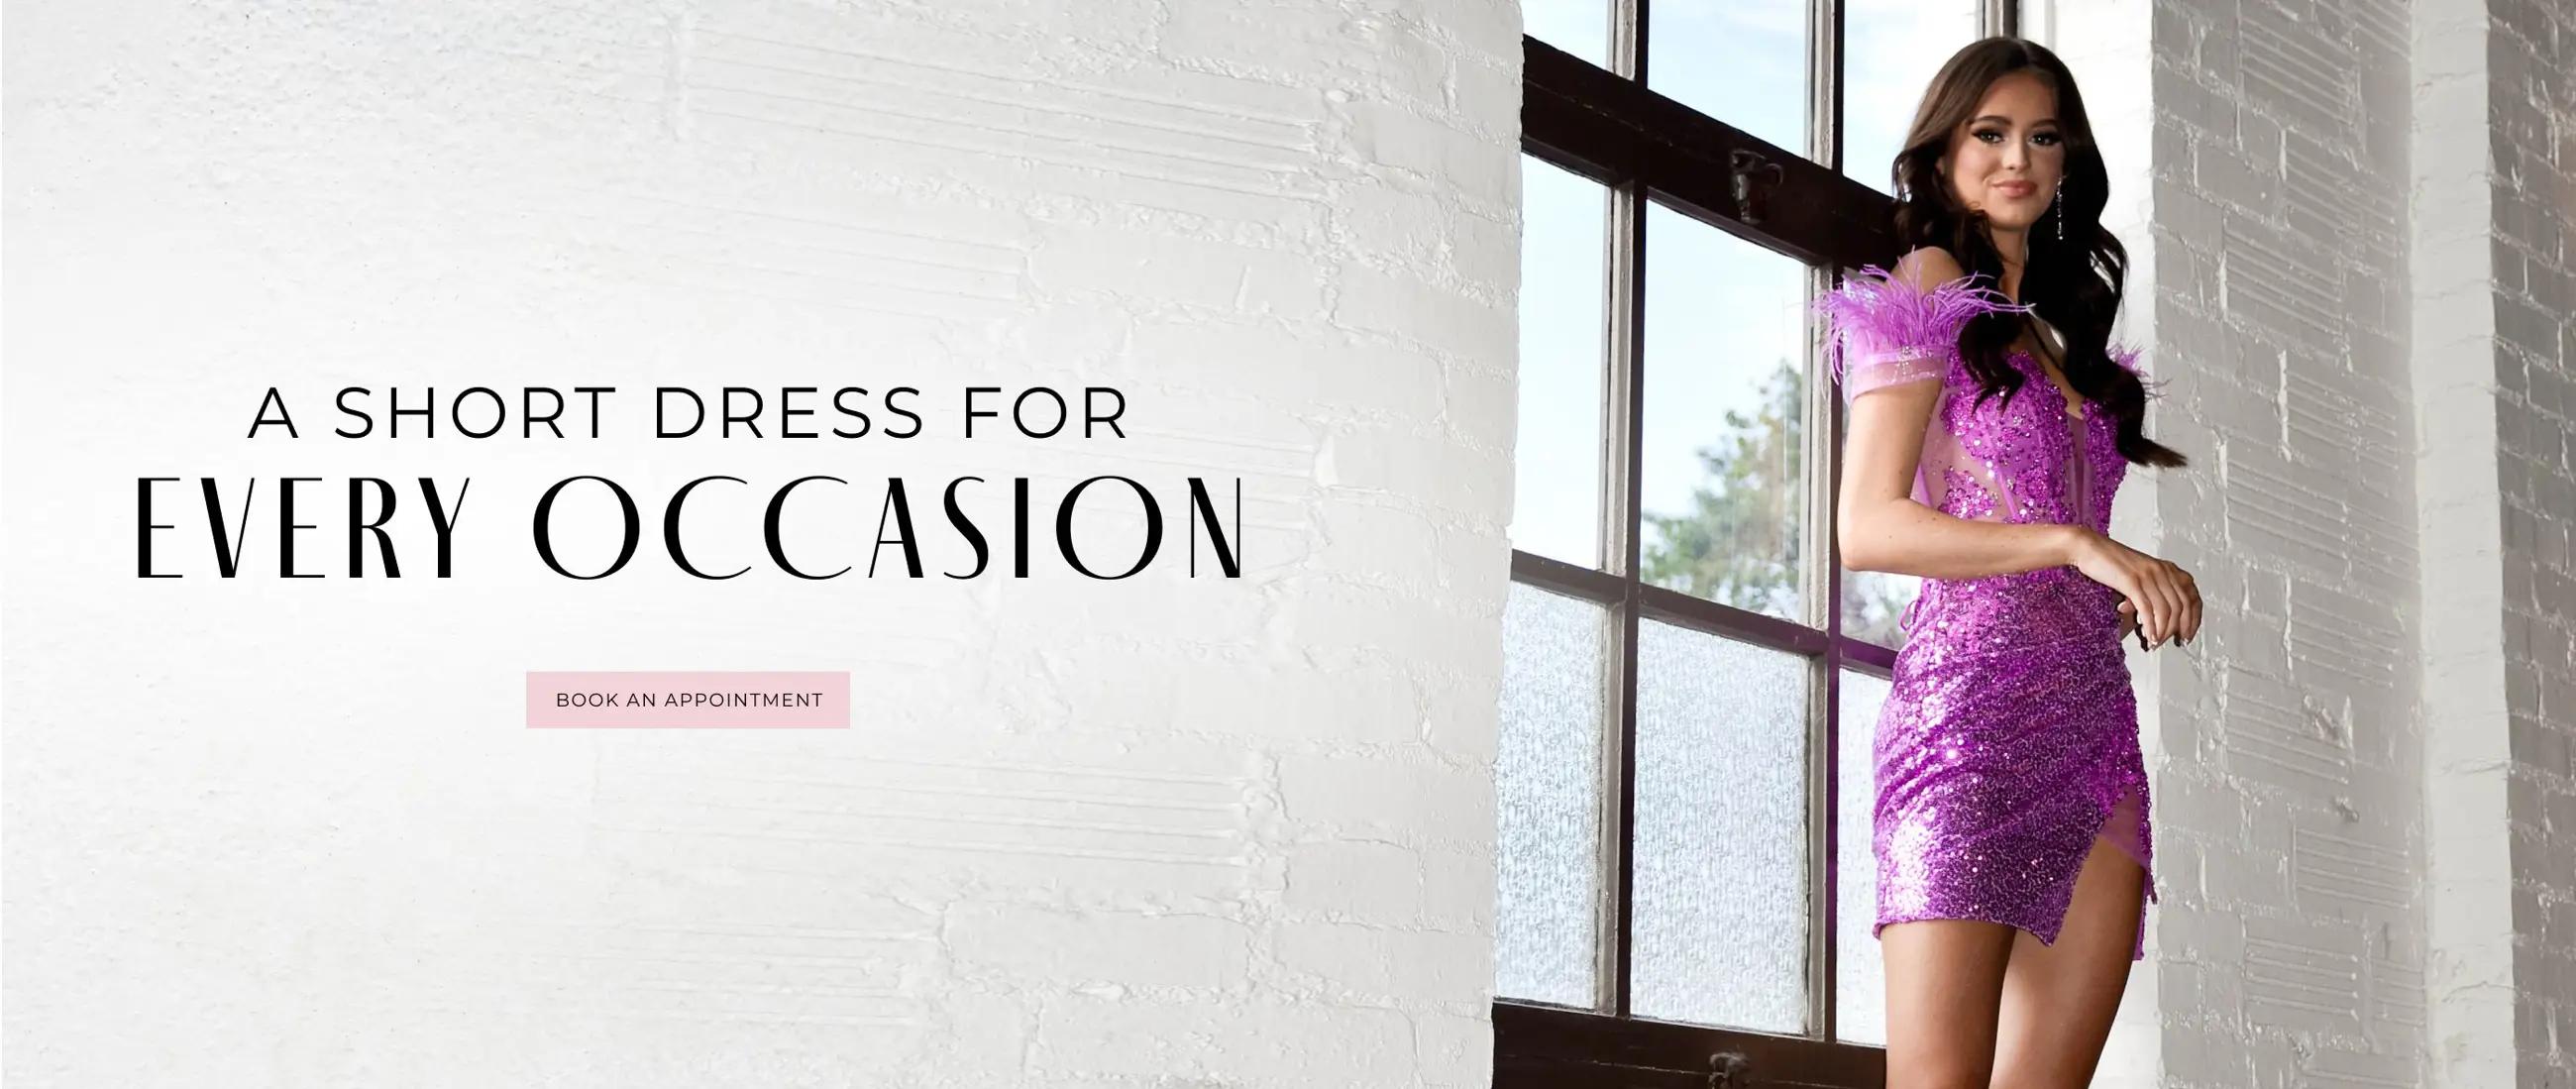 Every Occasion homepage banner desktop